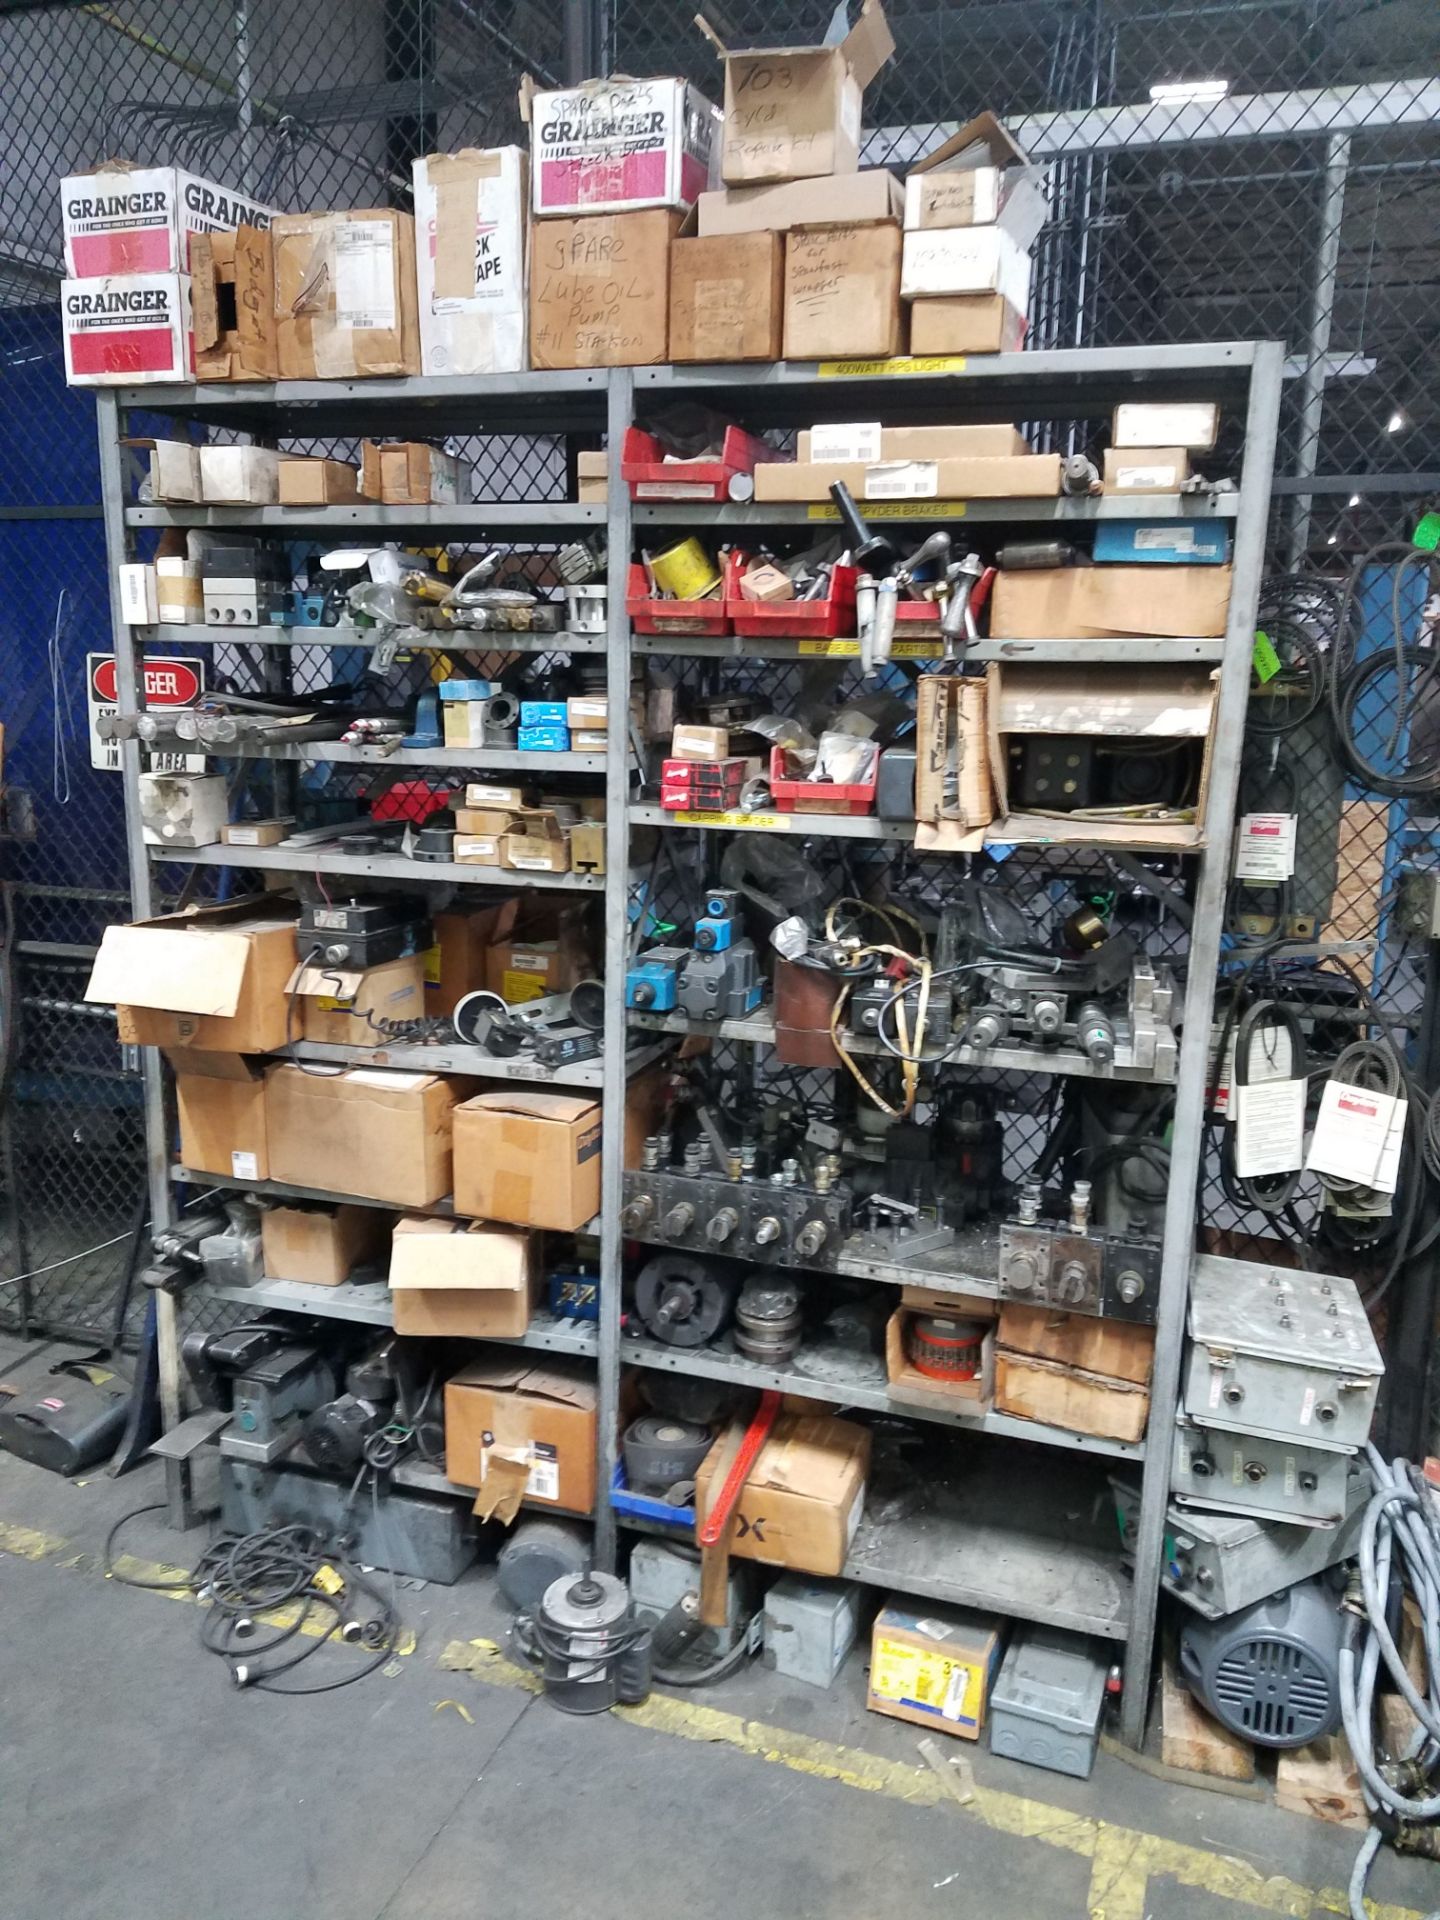 (LOT) REMAINING CONTENTS OF MAINTENANCE ROOM INCLUDING MOTORS, ELECTRICAL, MACHINE PARTS, VALVES,